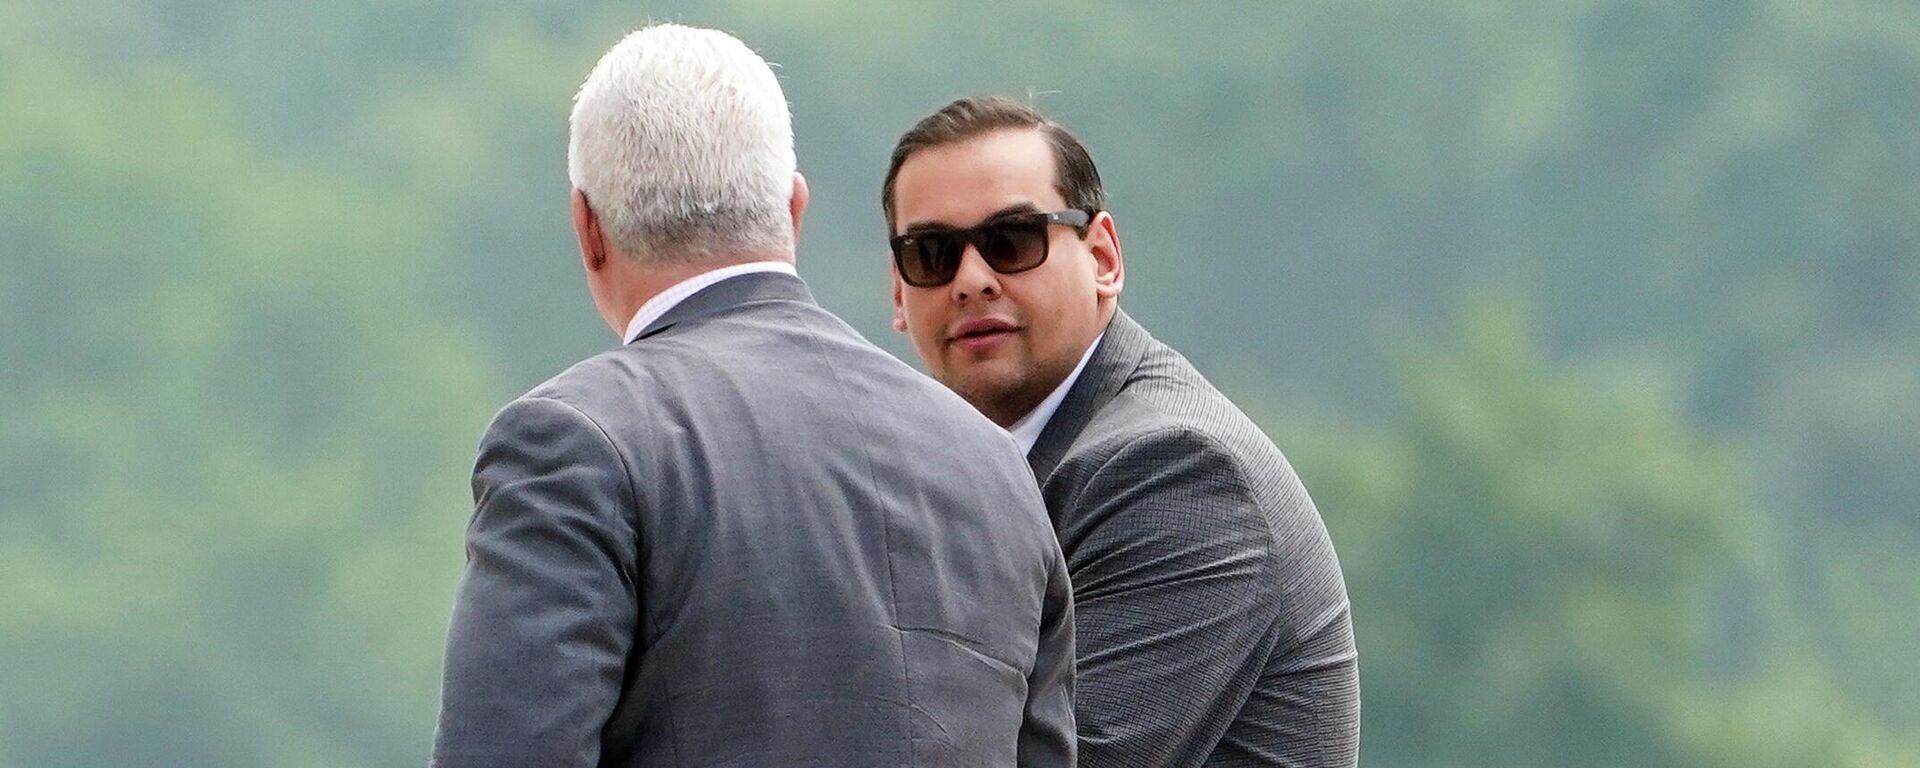 U.S. Rep. George Santos, right, R-N.Y., arrives to federal court alongside attorney Joseph Murray, Friday, June 30, 2023, in Central Islip, N.Y. Santos returned to court Friday for the first time since pleading not guilty last month to charges that he duped donors, stole from his campaign, collected fraudulent unemployment benefits and lied to Congress about being a millionaire. - Sputnik International, 1920, 17.08.2023